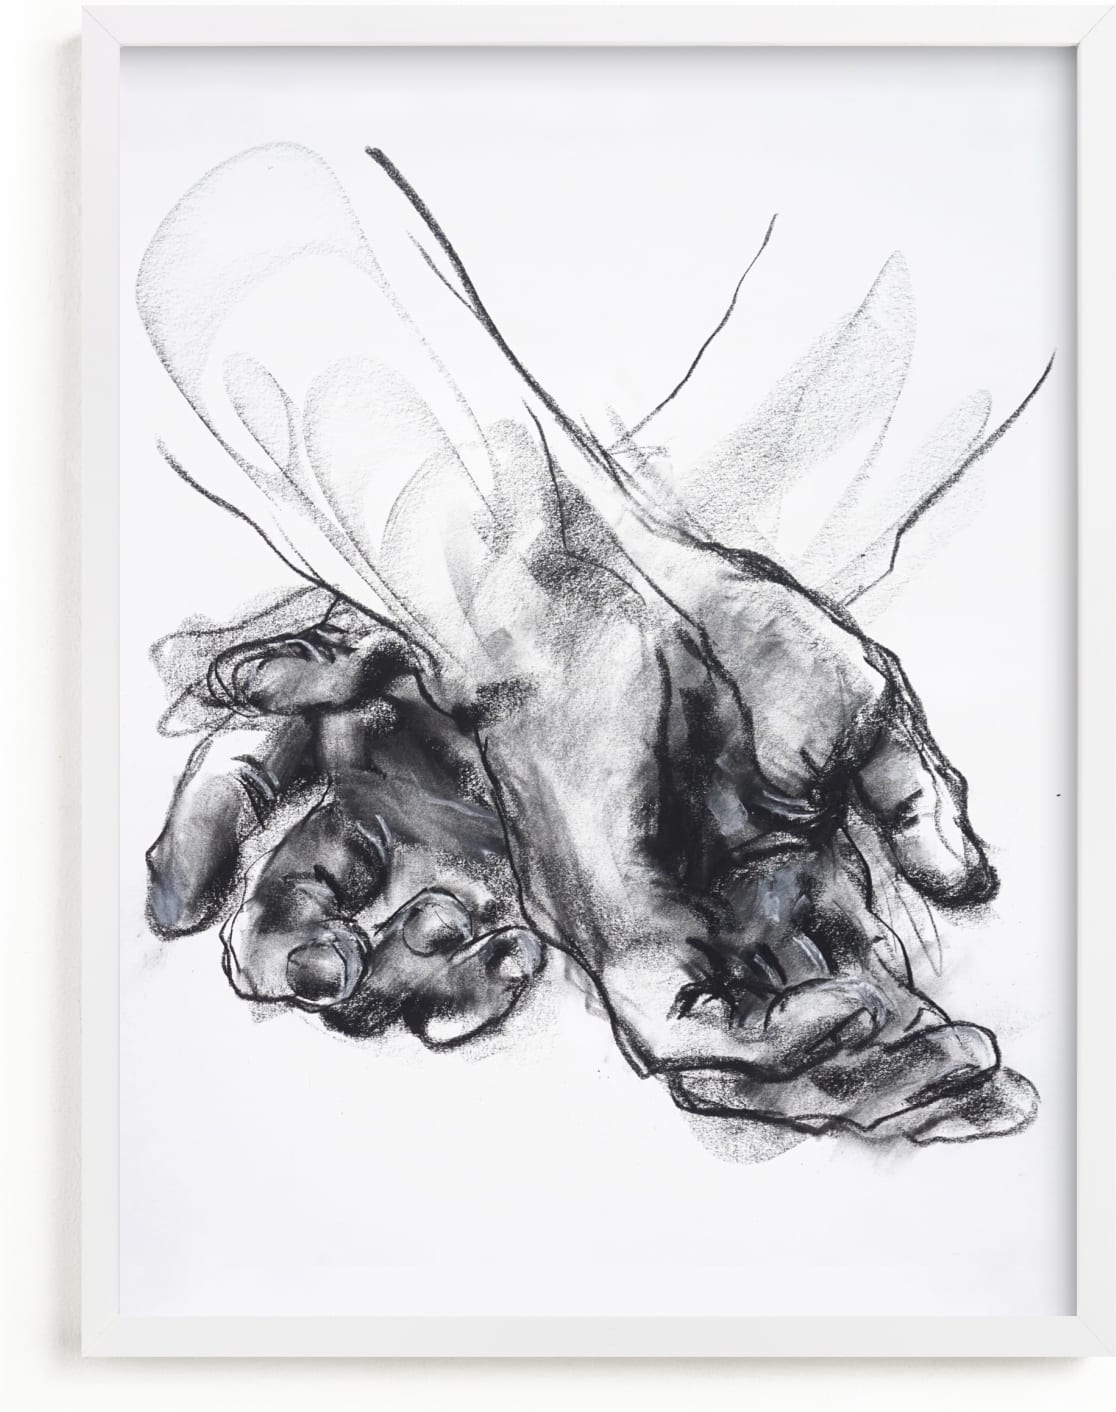 This is a black and white art by Derek overfield called Drawing 561 - Crossed Hands.